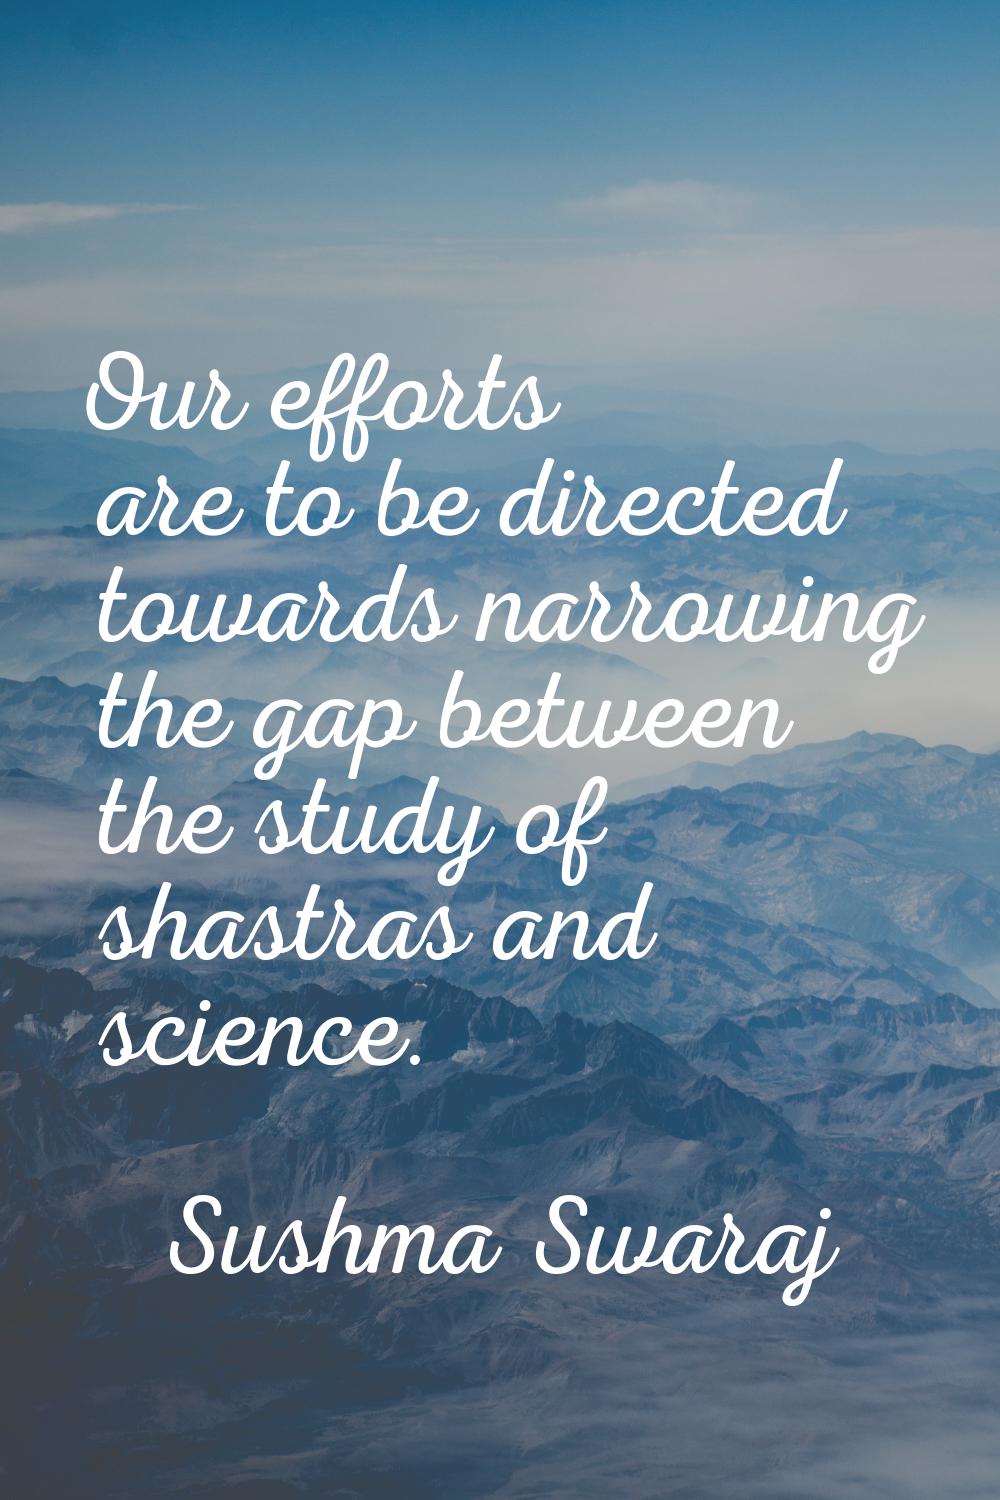 Our efforts are to be directed towards narrowing the gap between the study of shastras and science.